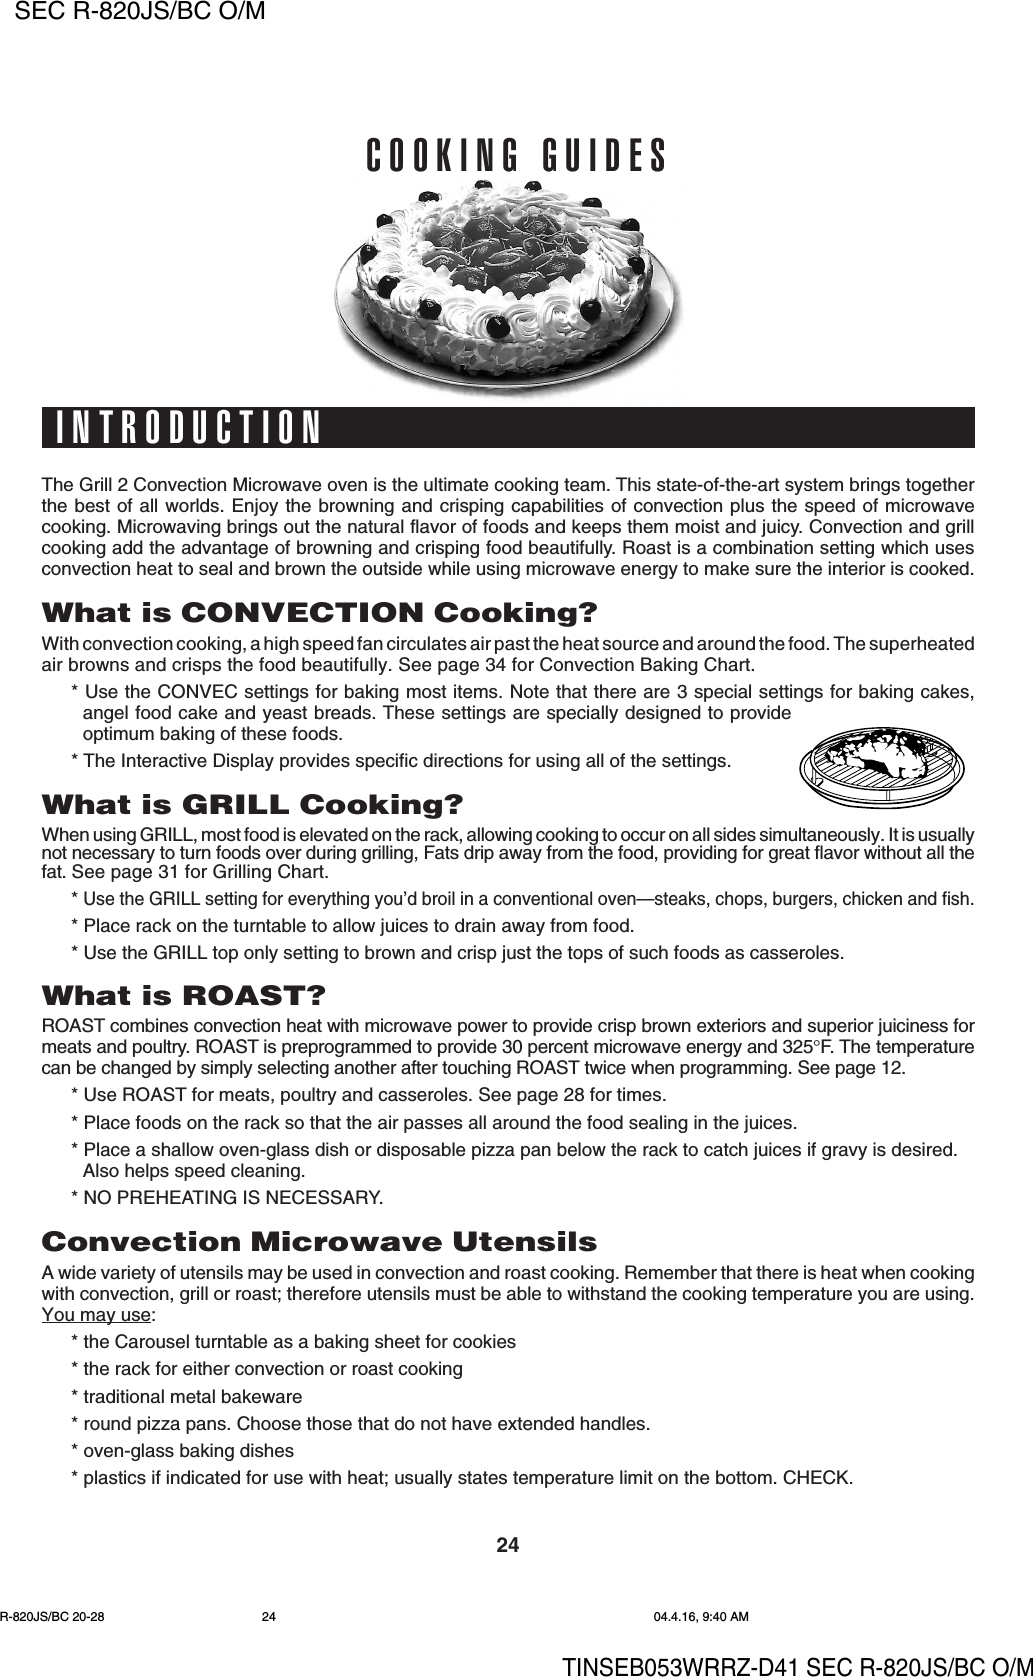 24SEC R-820JS/BC O/MTINSEB053WRRZ-D41 SEC R-820JS/BC O/MThe Grill 2 Convection Microwave oven is the ultimate cooking team. This state-of-the-art system brings togetherthe best of all worlds. Enjoy the browning and crisping capabilities of convection plus the speed of microwavecooking. Microwaving brings out the natural flavor of foods and keeps them moist and juicy. Convection and grillcooking add the advantage of browning and crisping food beautifully. Roast is a combination setting which usesconvection heat to seal and brown the outside while using microwave energy to make sure the interior is cooked.What is CONVECTION Cooking?With convection cooking, a high speed fan circulates air past the heat source and around the food. The superheatedair browns and crisps the food beautifully. See page 34 for Convection Baking Chart.* Use the CONVEC settings for baking most items. Note that there are 3 special settings for baking cakes,angel food cake and yeast breads. These settings are specially designed to provideoptimum baking of these foods.* The Interactive Display provides specific directions for using all of the settings.What is GRILL Cooking?When using GRILL, most food is elevated on the rack, allowing cooking to occur on all sides simultaneously. It is usuallynot necessary to turn foods over during grilling, Fats drip away from the food, providing for great flavor without all thefat. See page 31 for Grilling Chart.* Use the GRILL setting for everything you’d broil in a conventional oven—steaks, chops, burgers, chicken and fish.* Place rack on the turntable to allow juices to drain away from food.* Use the GRILL top only setting to brown and crisp just the tops of such foods as casseroles.What is ROAST?ROAST combines convection heat with microwave power to provide crisp brown exteriors and superior juiciness formeats and poultry. ROAST is preprogrammed to provide 30 percent microwave energy and 325°F. The temperaturecan be changed by simply selecting another after touching ROAST twice when programming. See page 12.* Use ROAST for meats, poultry and casseroles. See page 28 for times.* Place foods on the rack so that the air passes all around the food sealing in the juices.* Place a shallow oven-glass dish or disposable pizza pan below the rack to catch juices if gravy is desired.Also helps speed cleaning.* NO PREHEATING IS NECESSARY.Convection Microwave UtensilsA wide variety of utensils may be used in convection and roast cooking. Remember that there is heat when cookingwith convection, grill or roast; therefore utensils must be able to withstand the cooking temperature you are using.You may use:* the Carousel turntable as a baking sheet for cookies* the rack for either convection or roast cooking* traditional metal bakeware* round pizza pans. Choose those that do not have extended handles.* oven-glass baking dishes* plastics if indicated for use with heat; usually states temperature limit on the bottom. CHECK.INTRODUCTIONCOOKING GUIDESsR-820JS/BC 20-28 04.4.16, 9:40 AM24